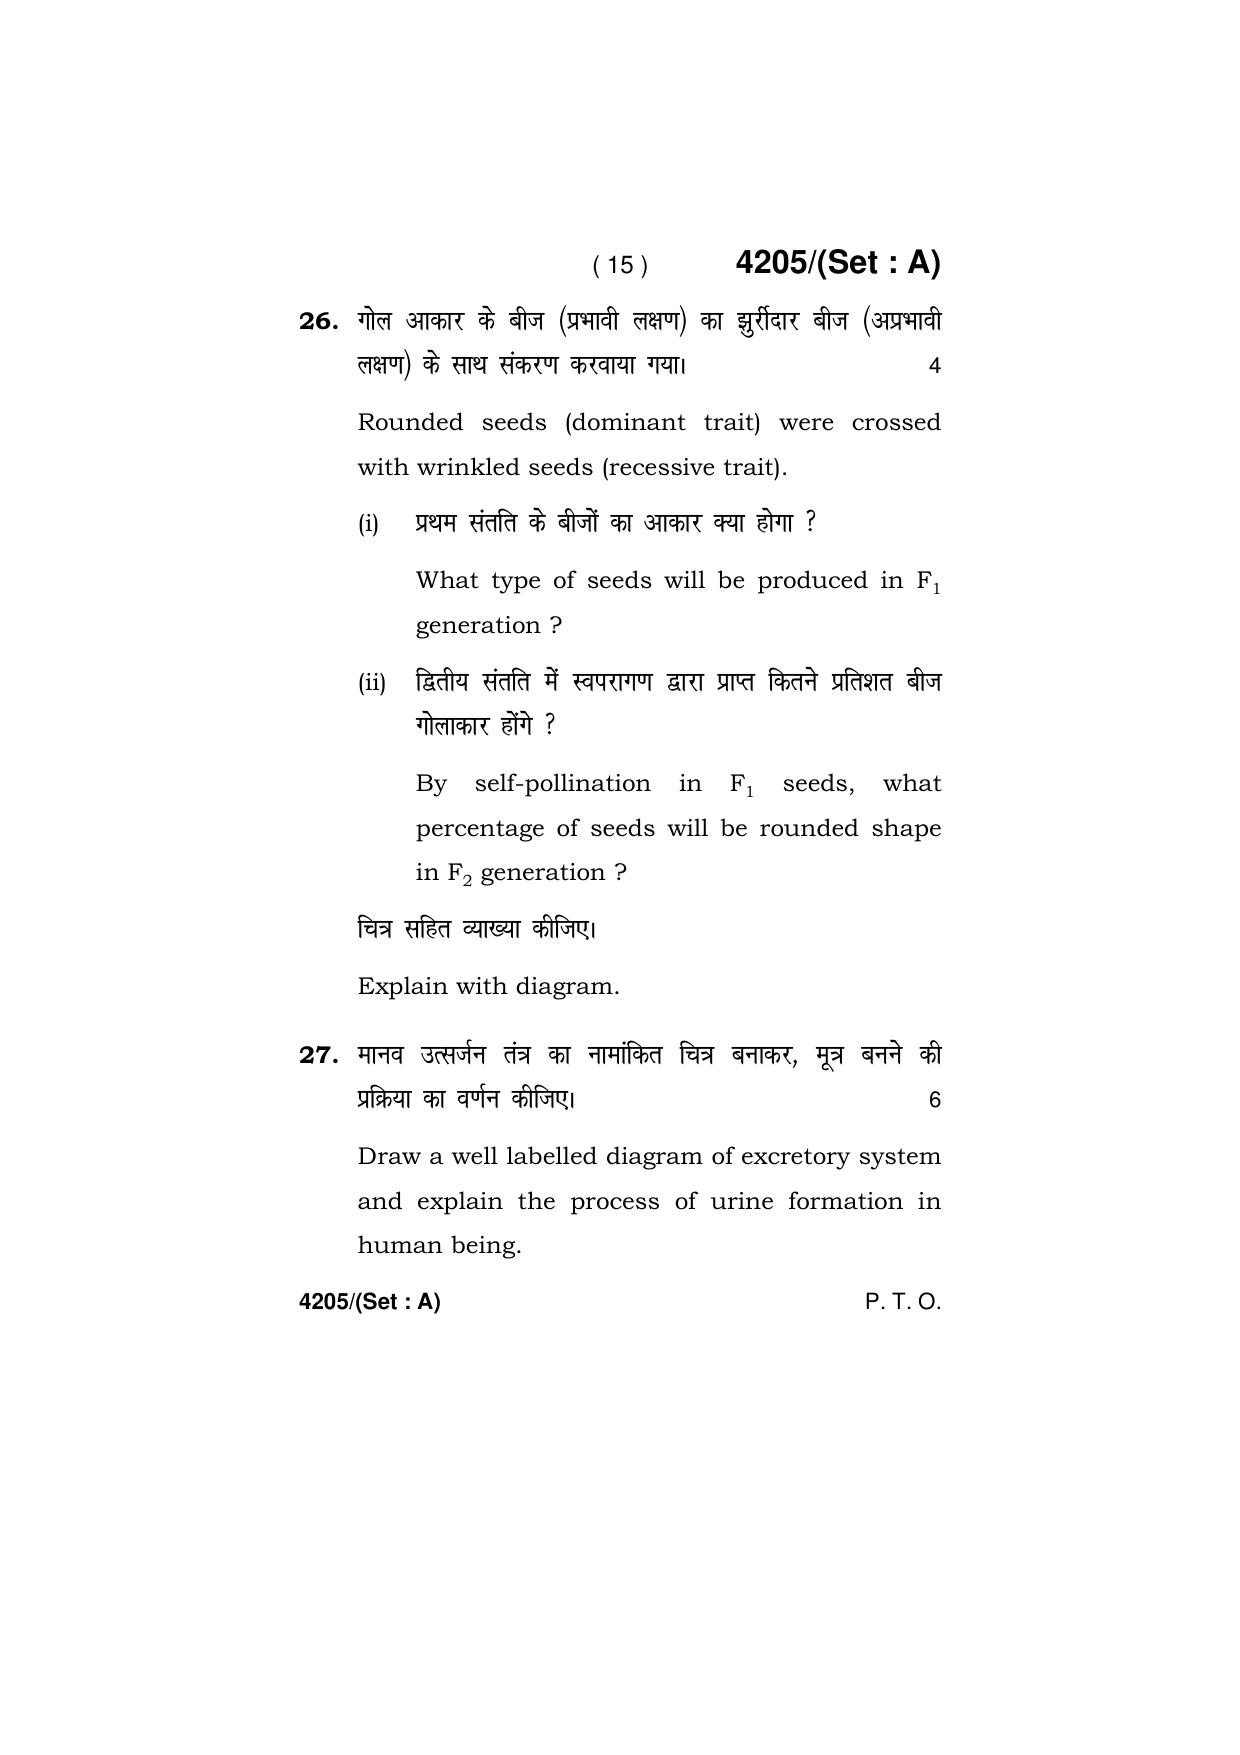 Haryana Board HBSE Class 10 Science (All Set) 2019 Question Paper - Page 15